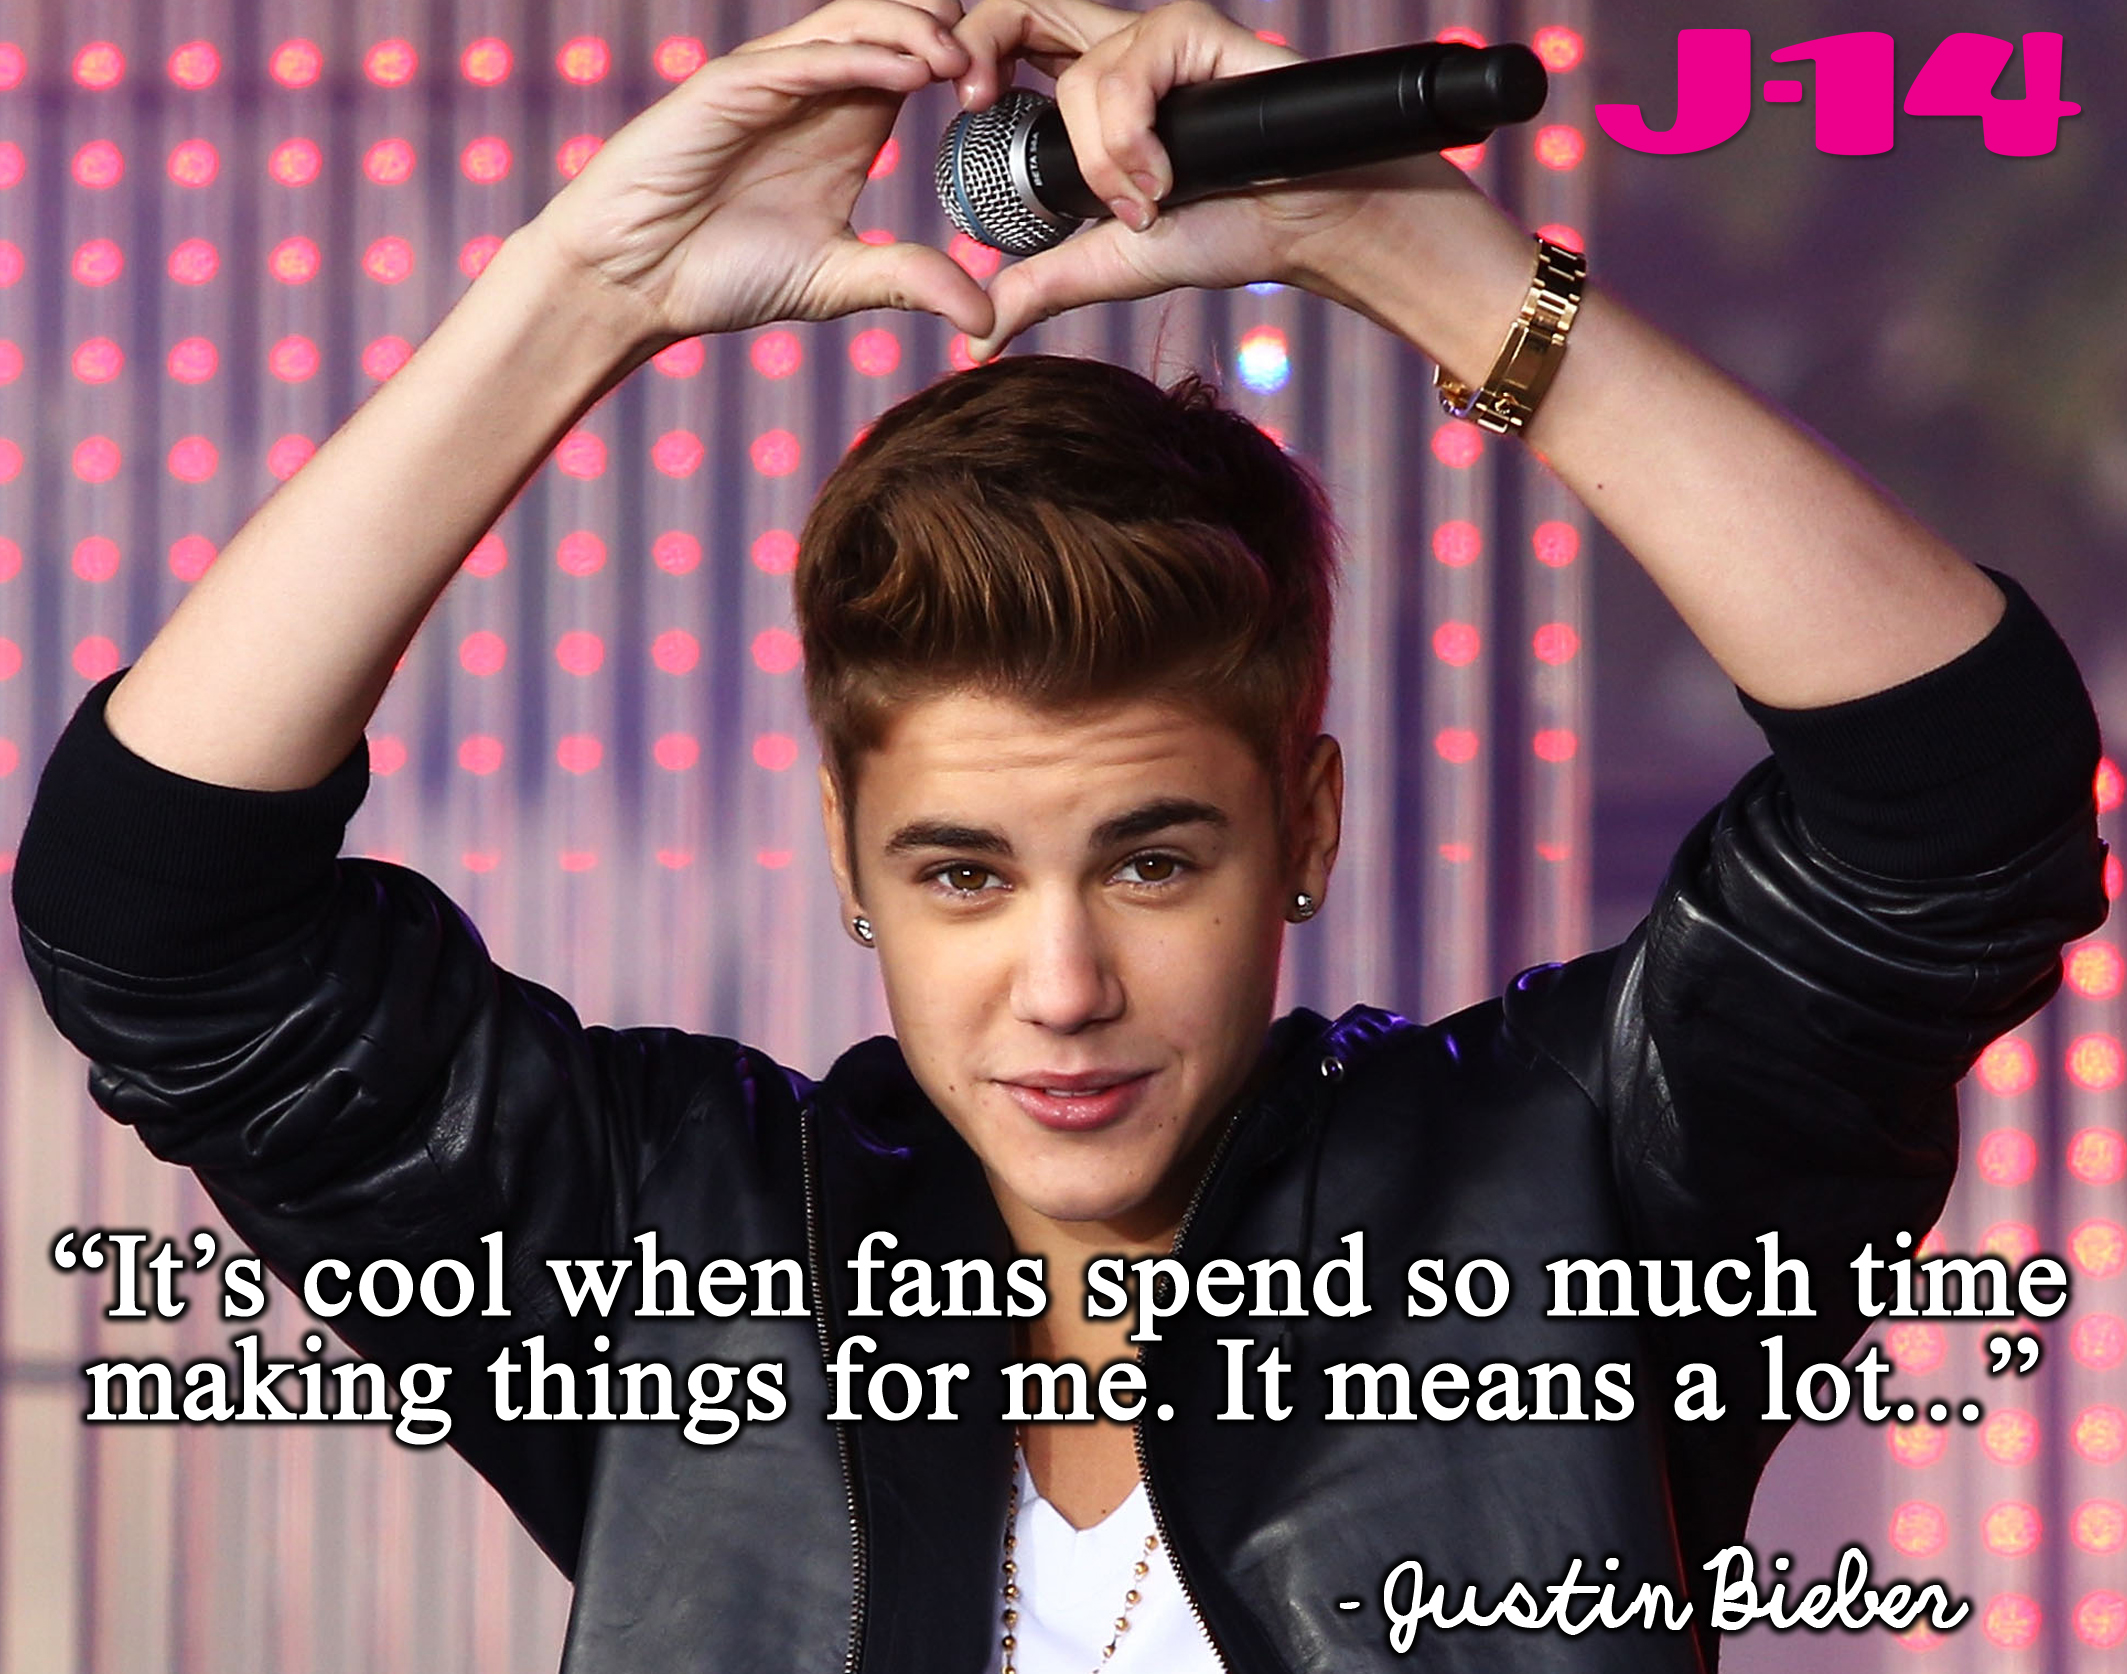 10 Justin Bieber Quotes That Show Why He's Our Favorite Canadian - J-14